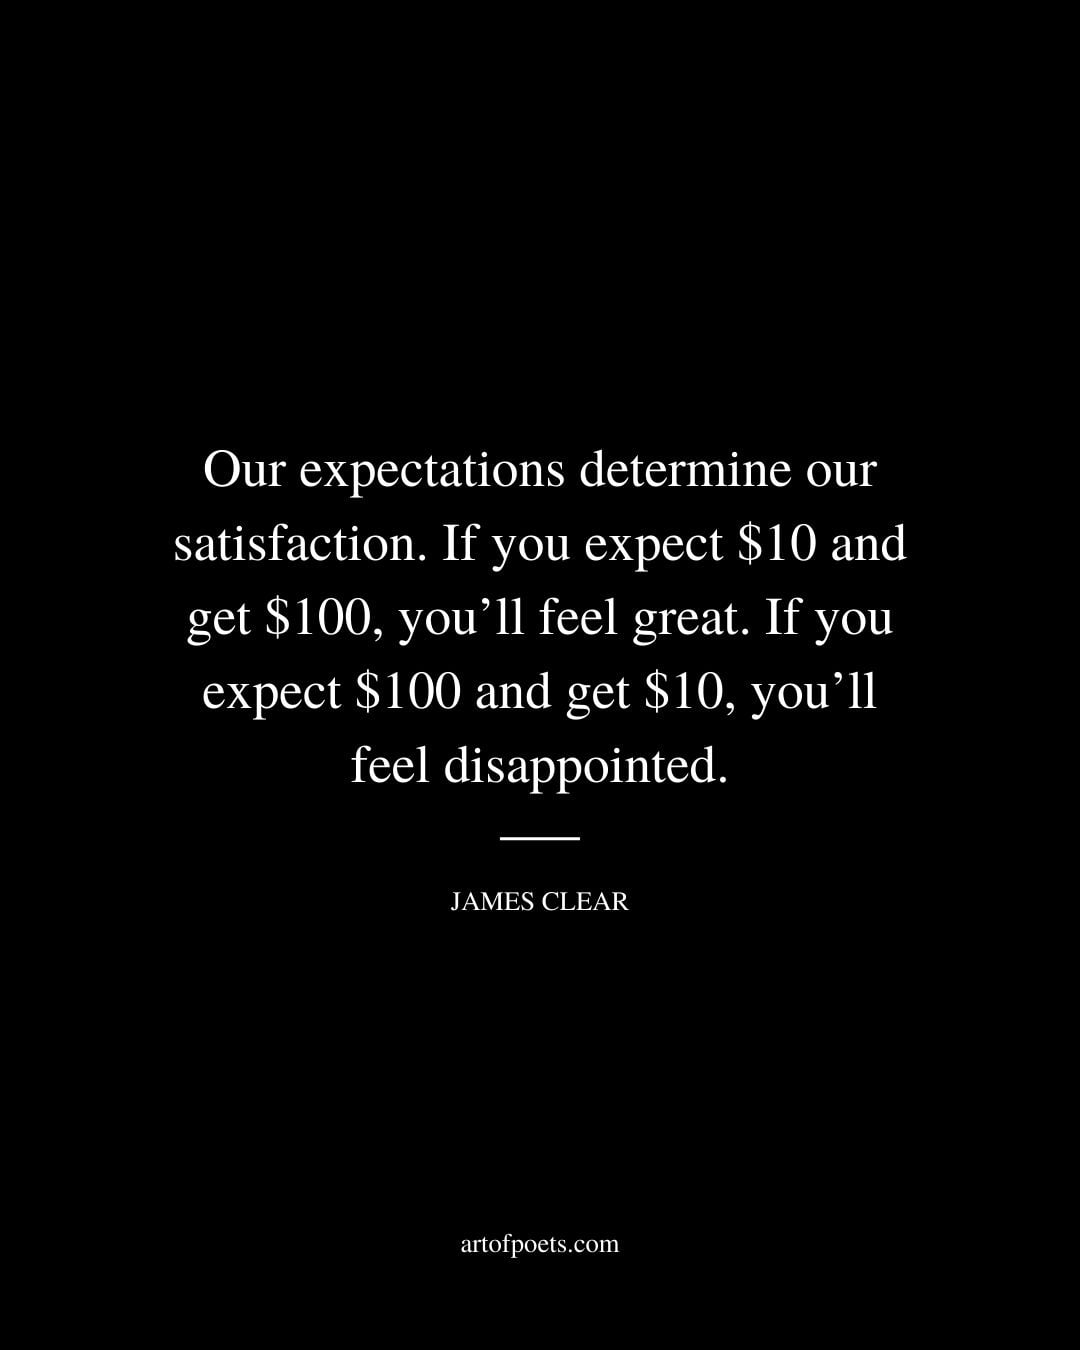 Our expectations determine our satisfaction. If you expect 10 and get 100 youll feel great. If you expect 100 and get 10 youll feel disappointed